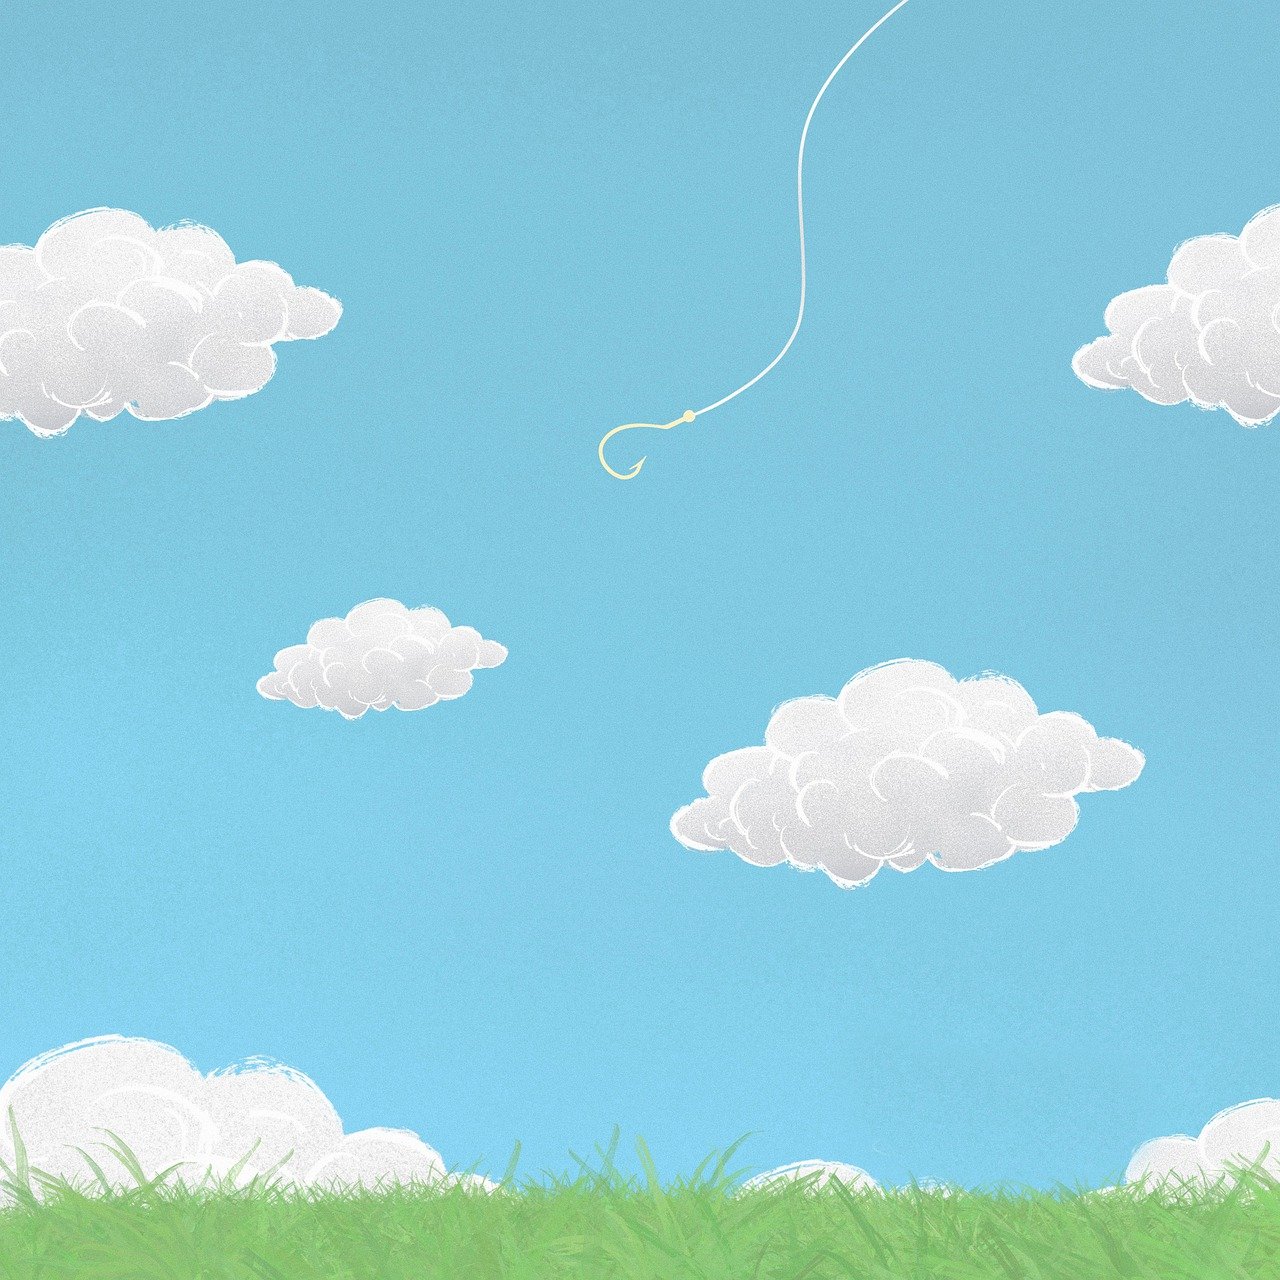 a painting of a person flying a kite in the sky, concept art, inspired by Quint Buchholz, deviantart, puffy cute clouds, meadow background, disney 2d animation still, fishing pole